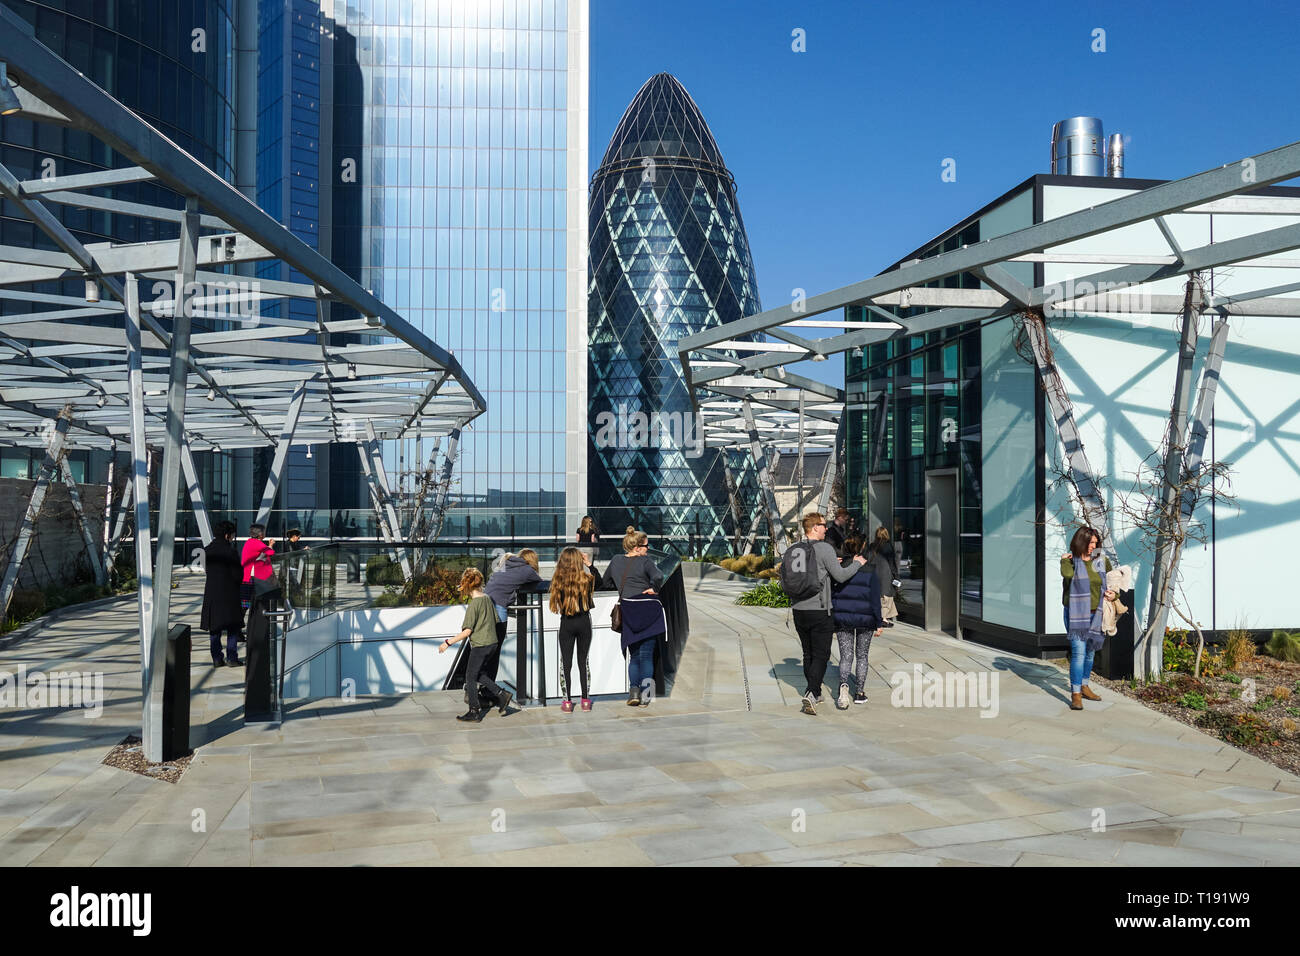 People enjoy sunny day on roof garden on top of Fen Court at 120 Fenchurch Street, London England United Kingdom UK Stock Photo